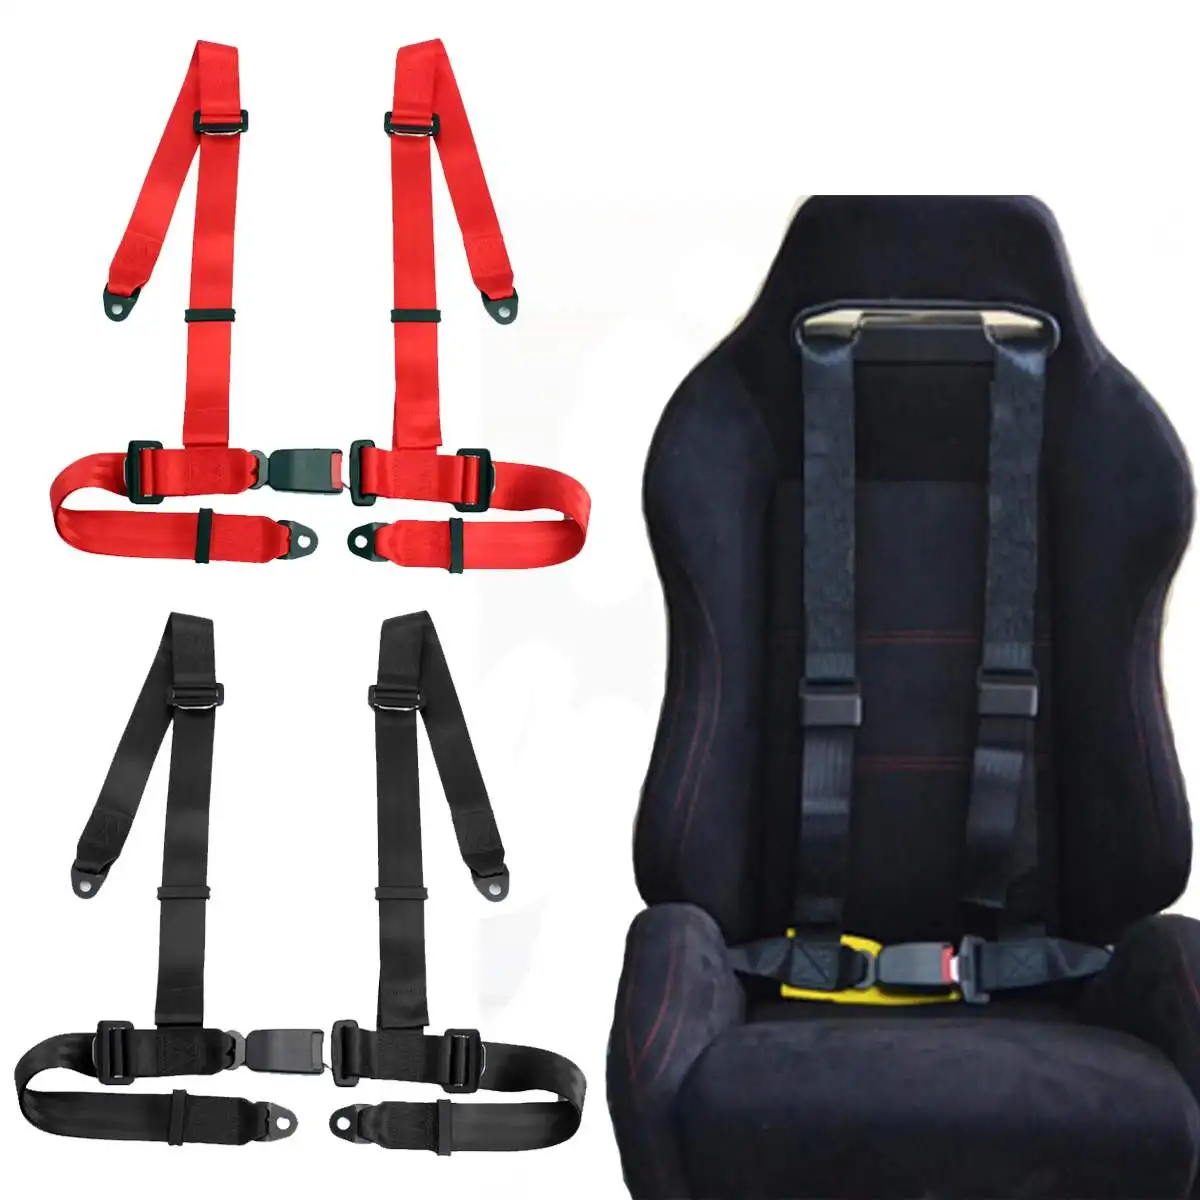 Adjustable Universal Three 3 Point Car Tether Safety Seat Lap Belt & Extensions 